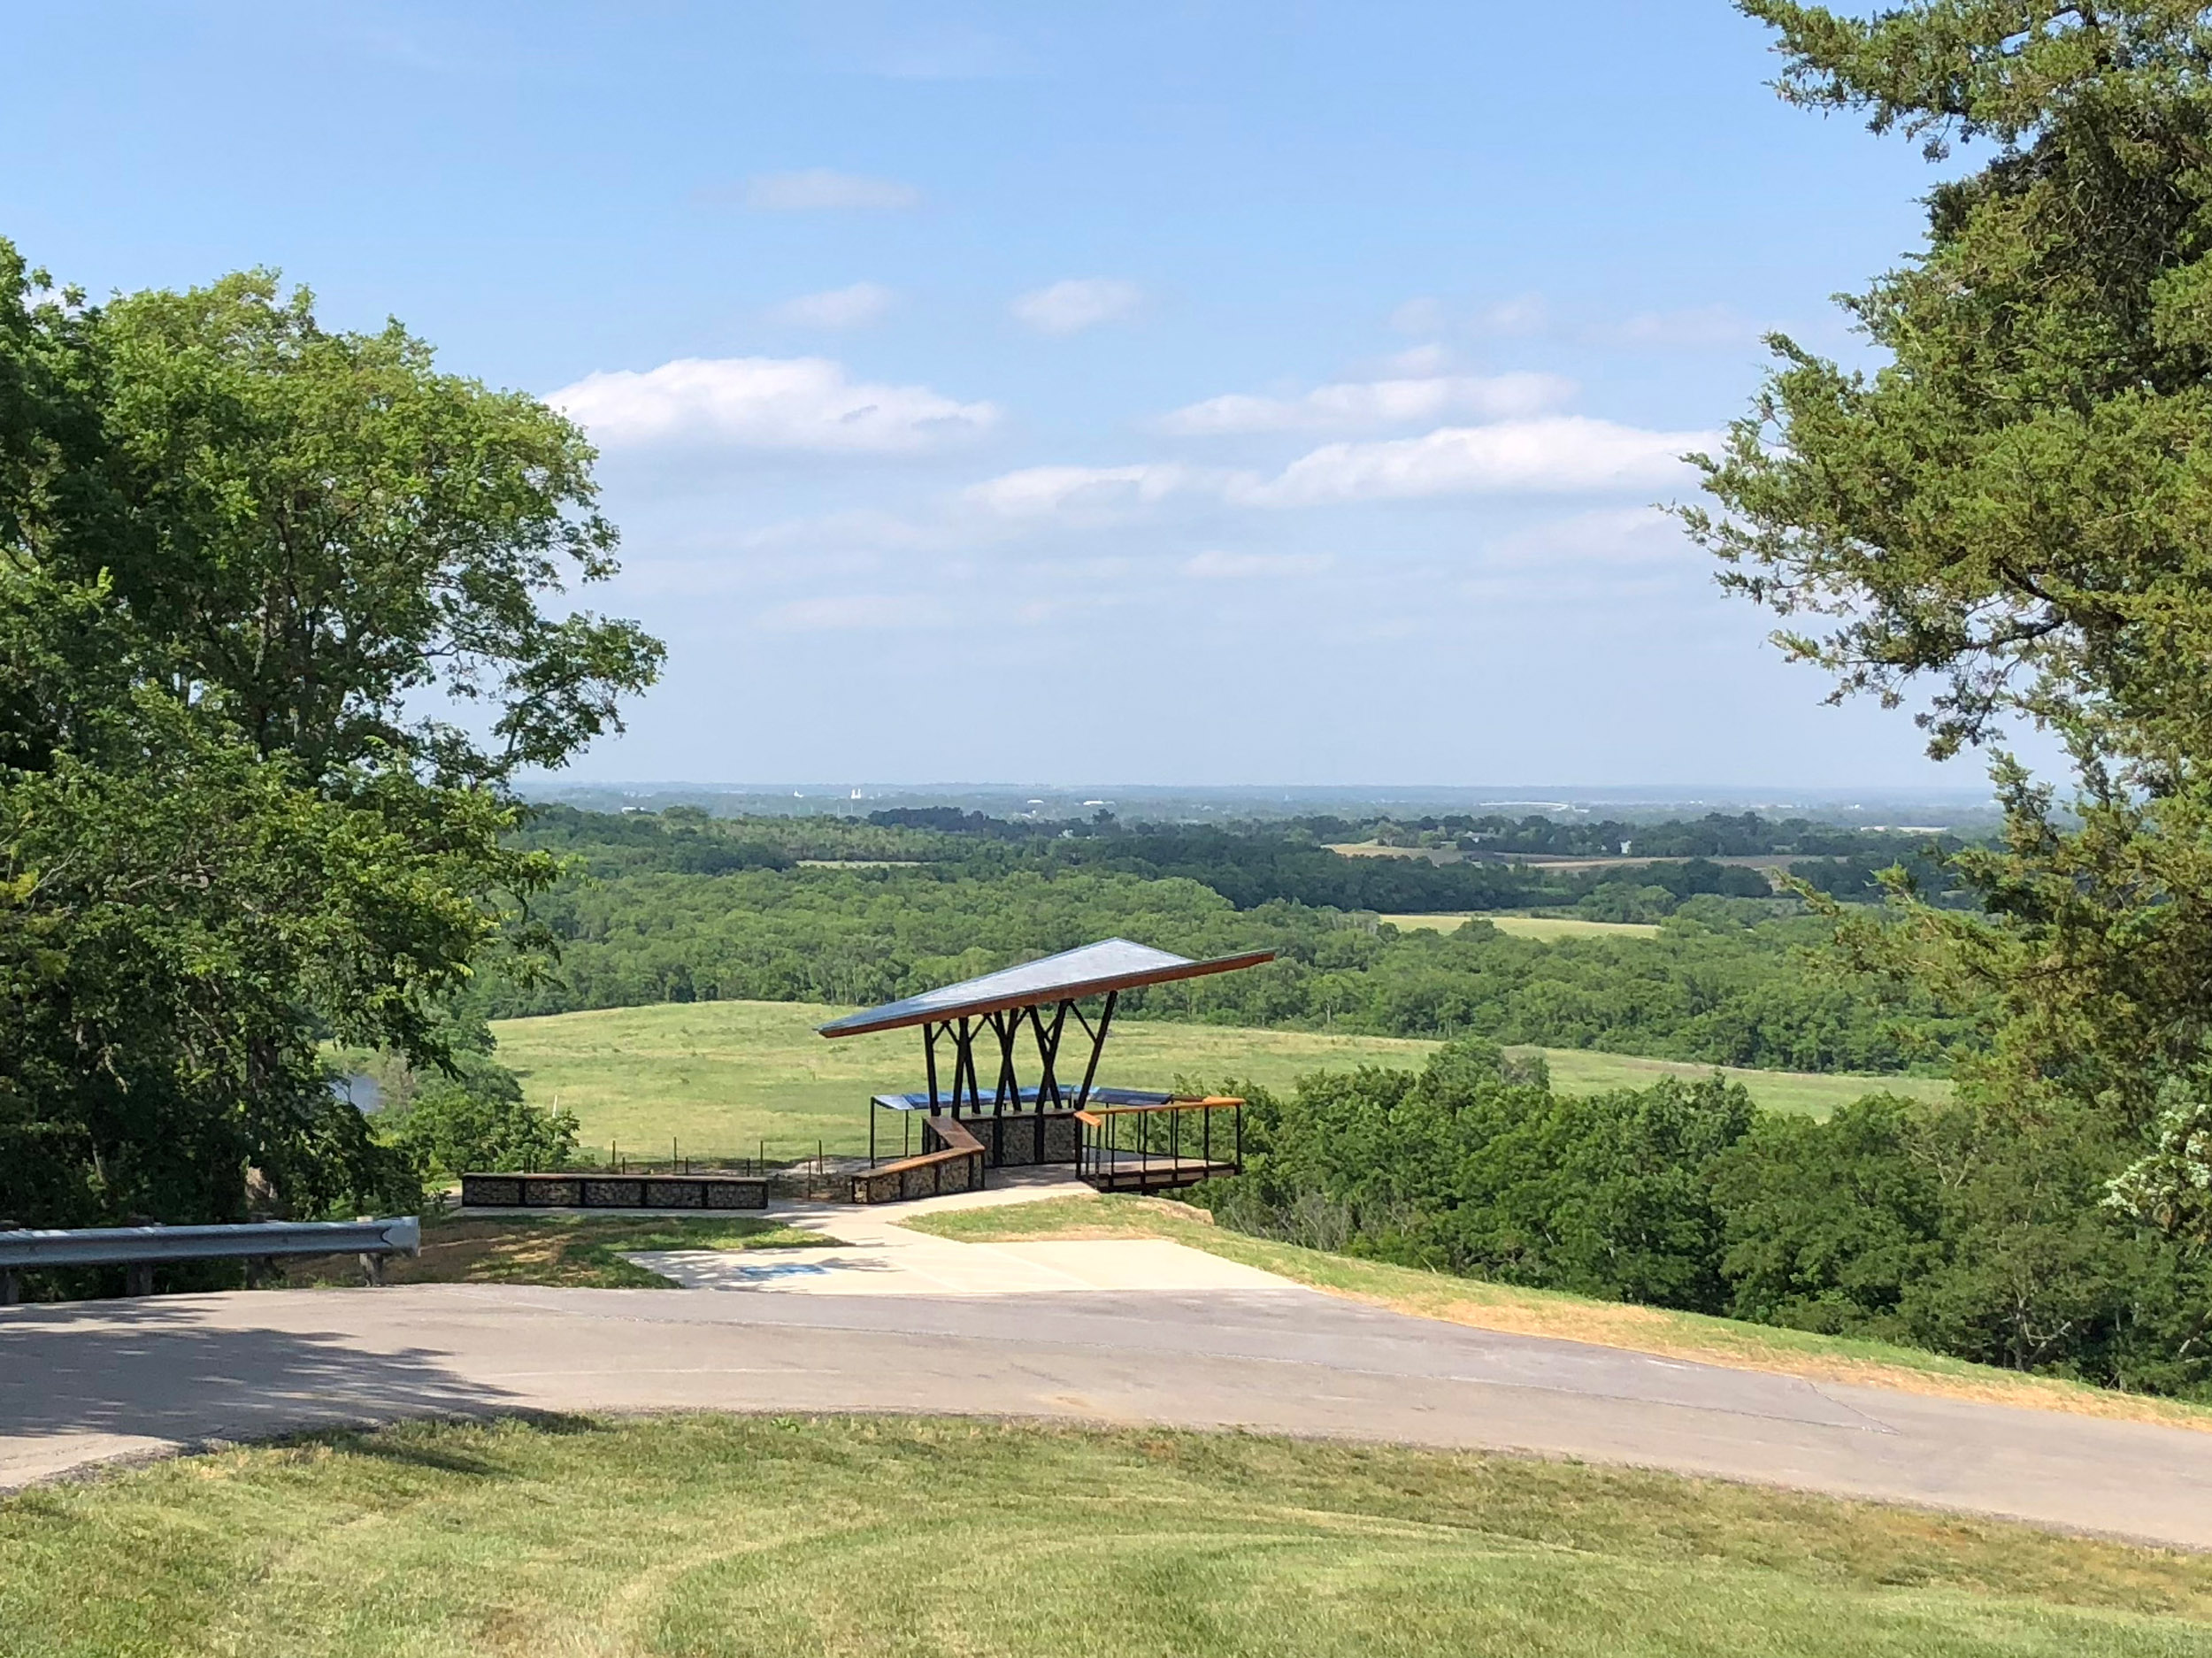 Passerine Pavilion, on approach, from the top of the ridge